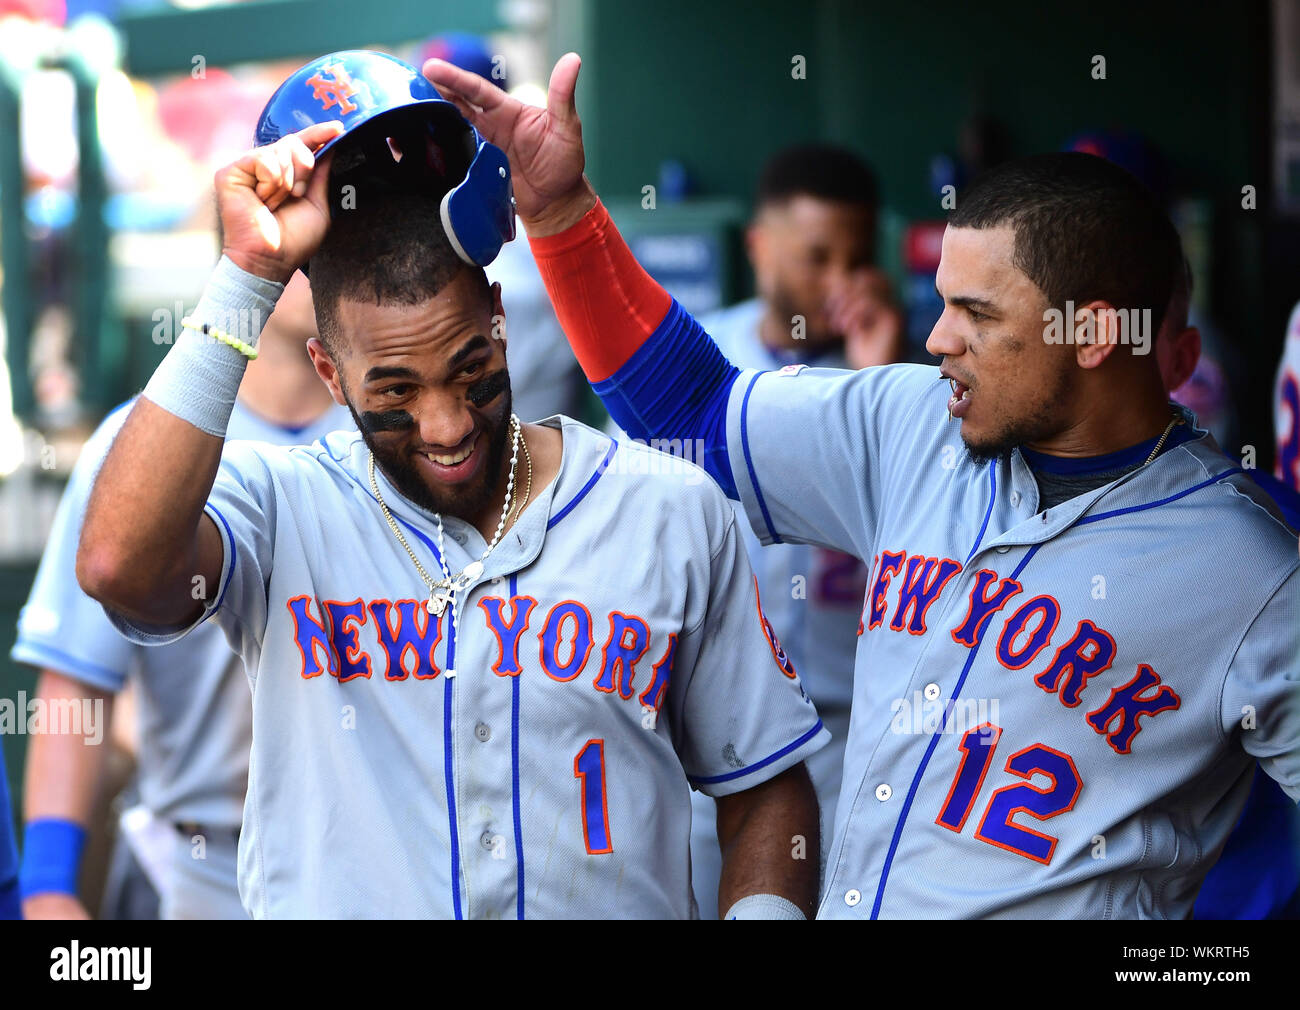 Washington, United States. 04th Sep, 2019. New York Mets Amed Rosario (1) is congratulated by teammate Juan Lagares in the dugout after scoring off of a single hit by Jeff McNeil against the Washington Nationals in the sixth inning at National Park in Washington, DC on Wednesday, September 4, 2019. Photo by Kevin Dietsch/UPI Credit: UPI/Alamy Live News Stock Photo